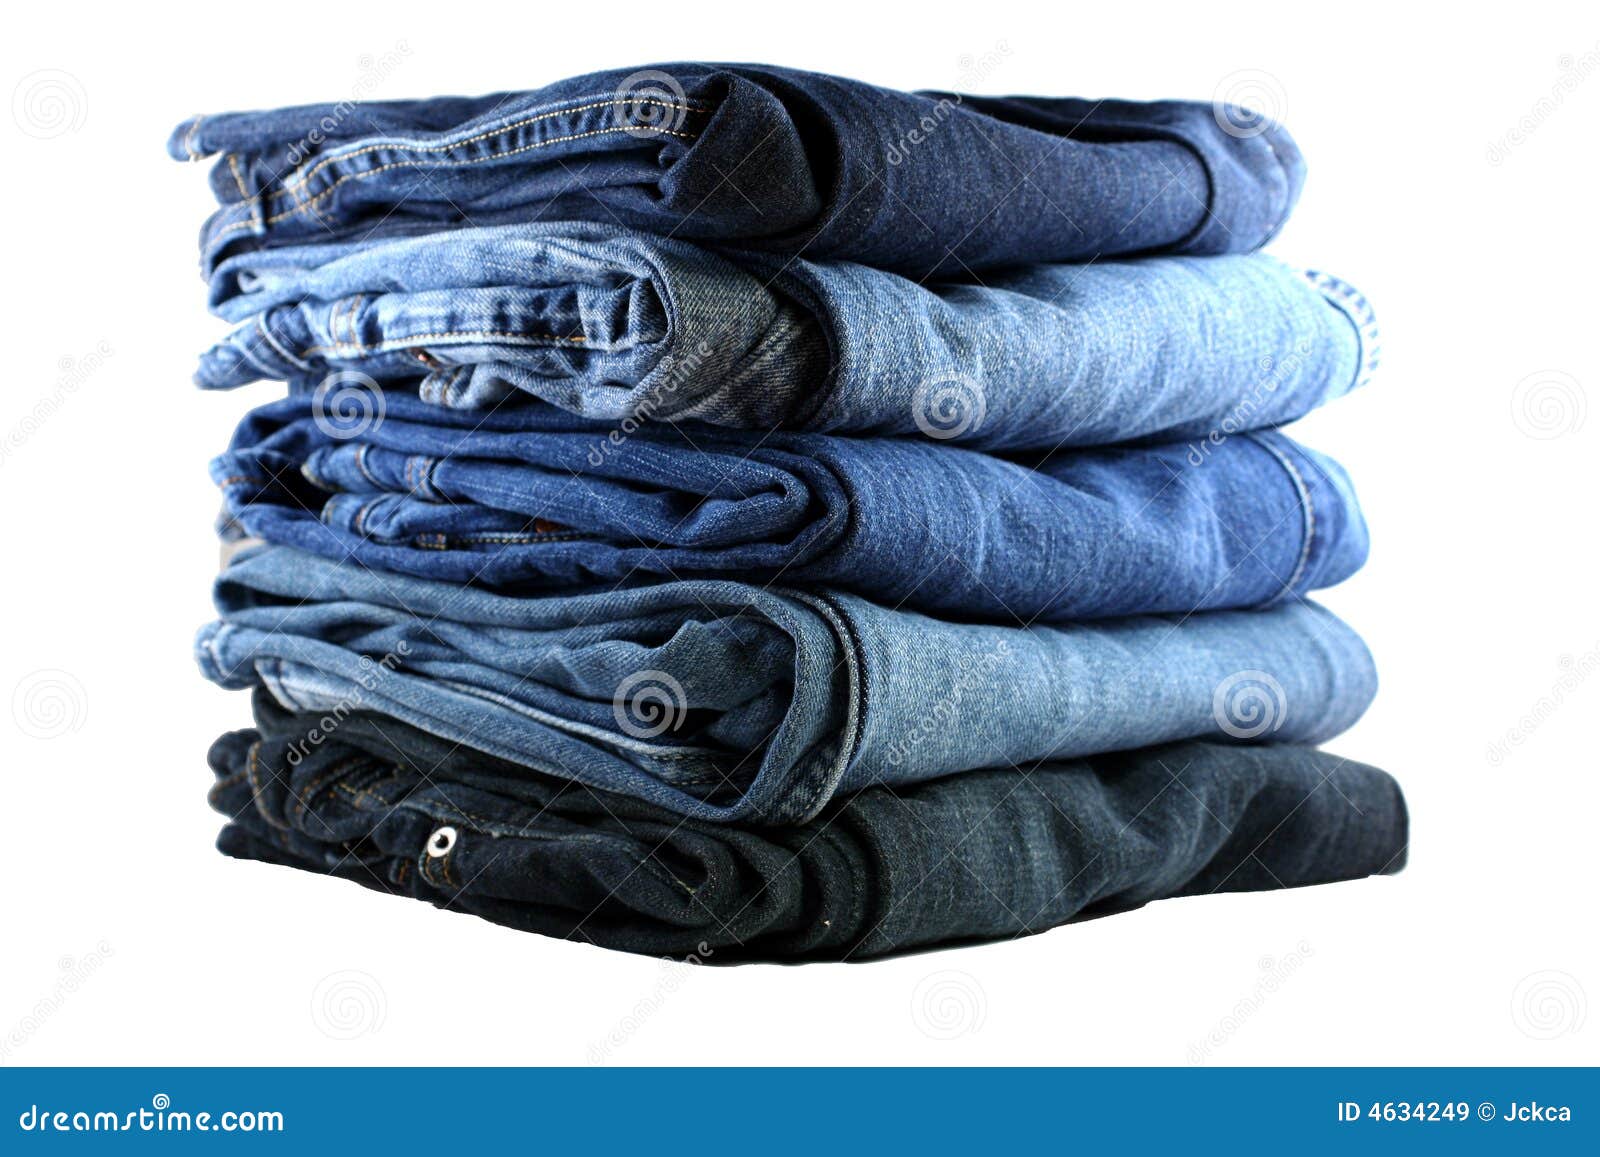 stack of five blue jeans